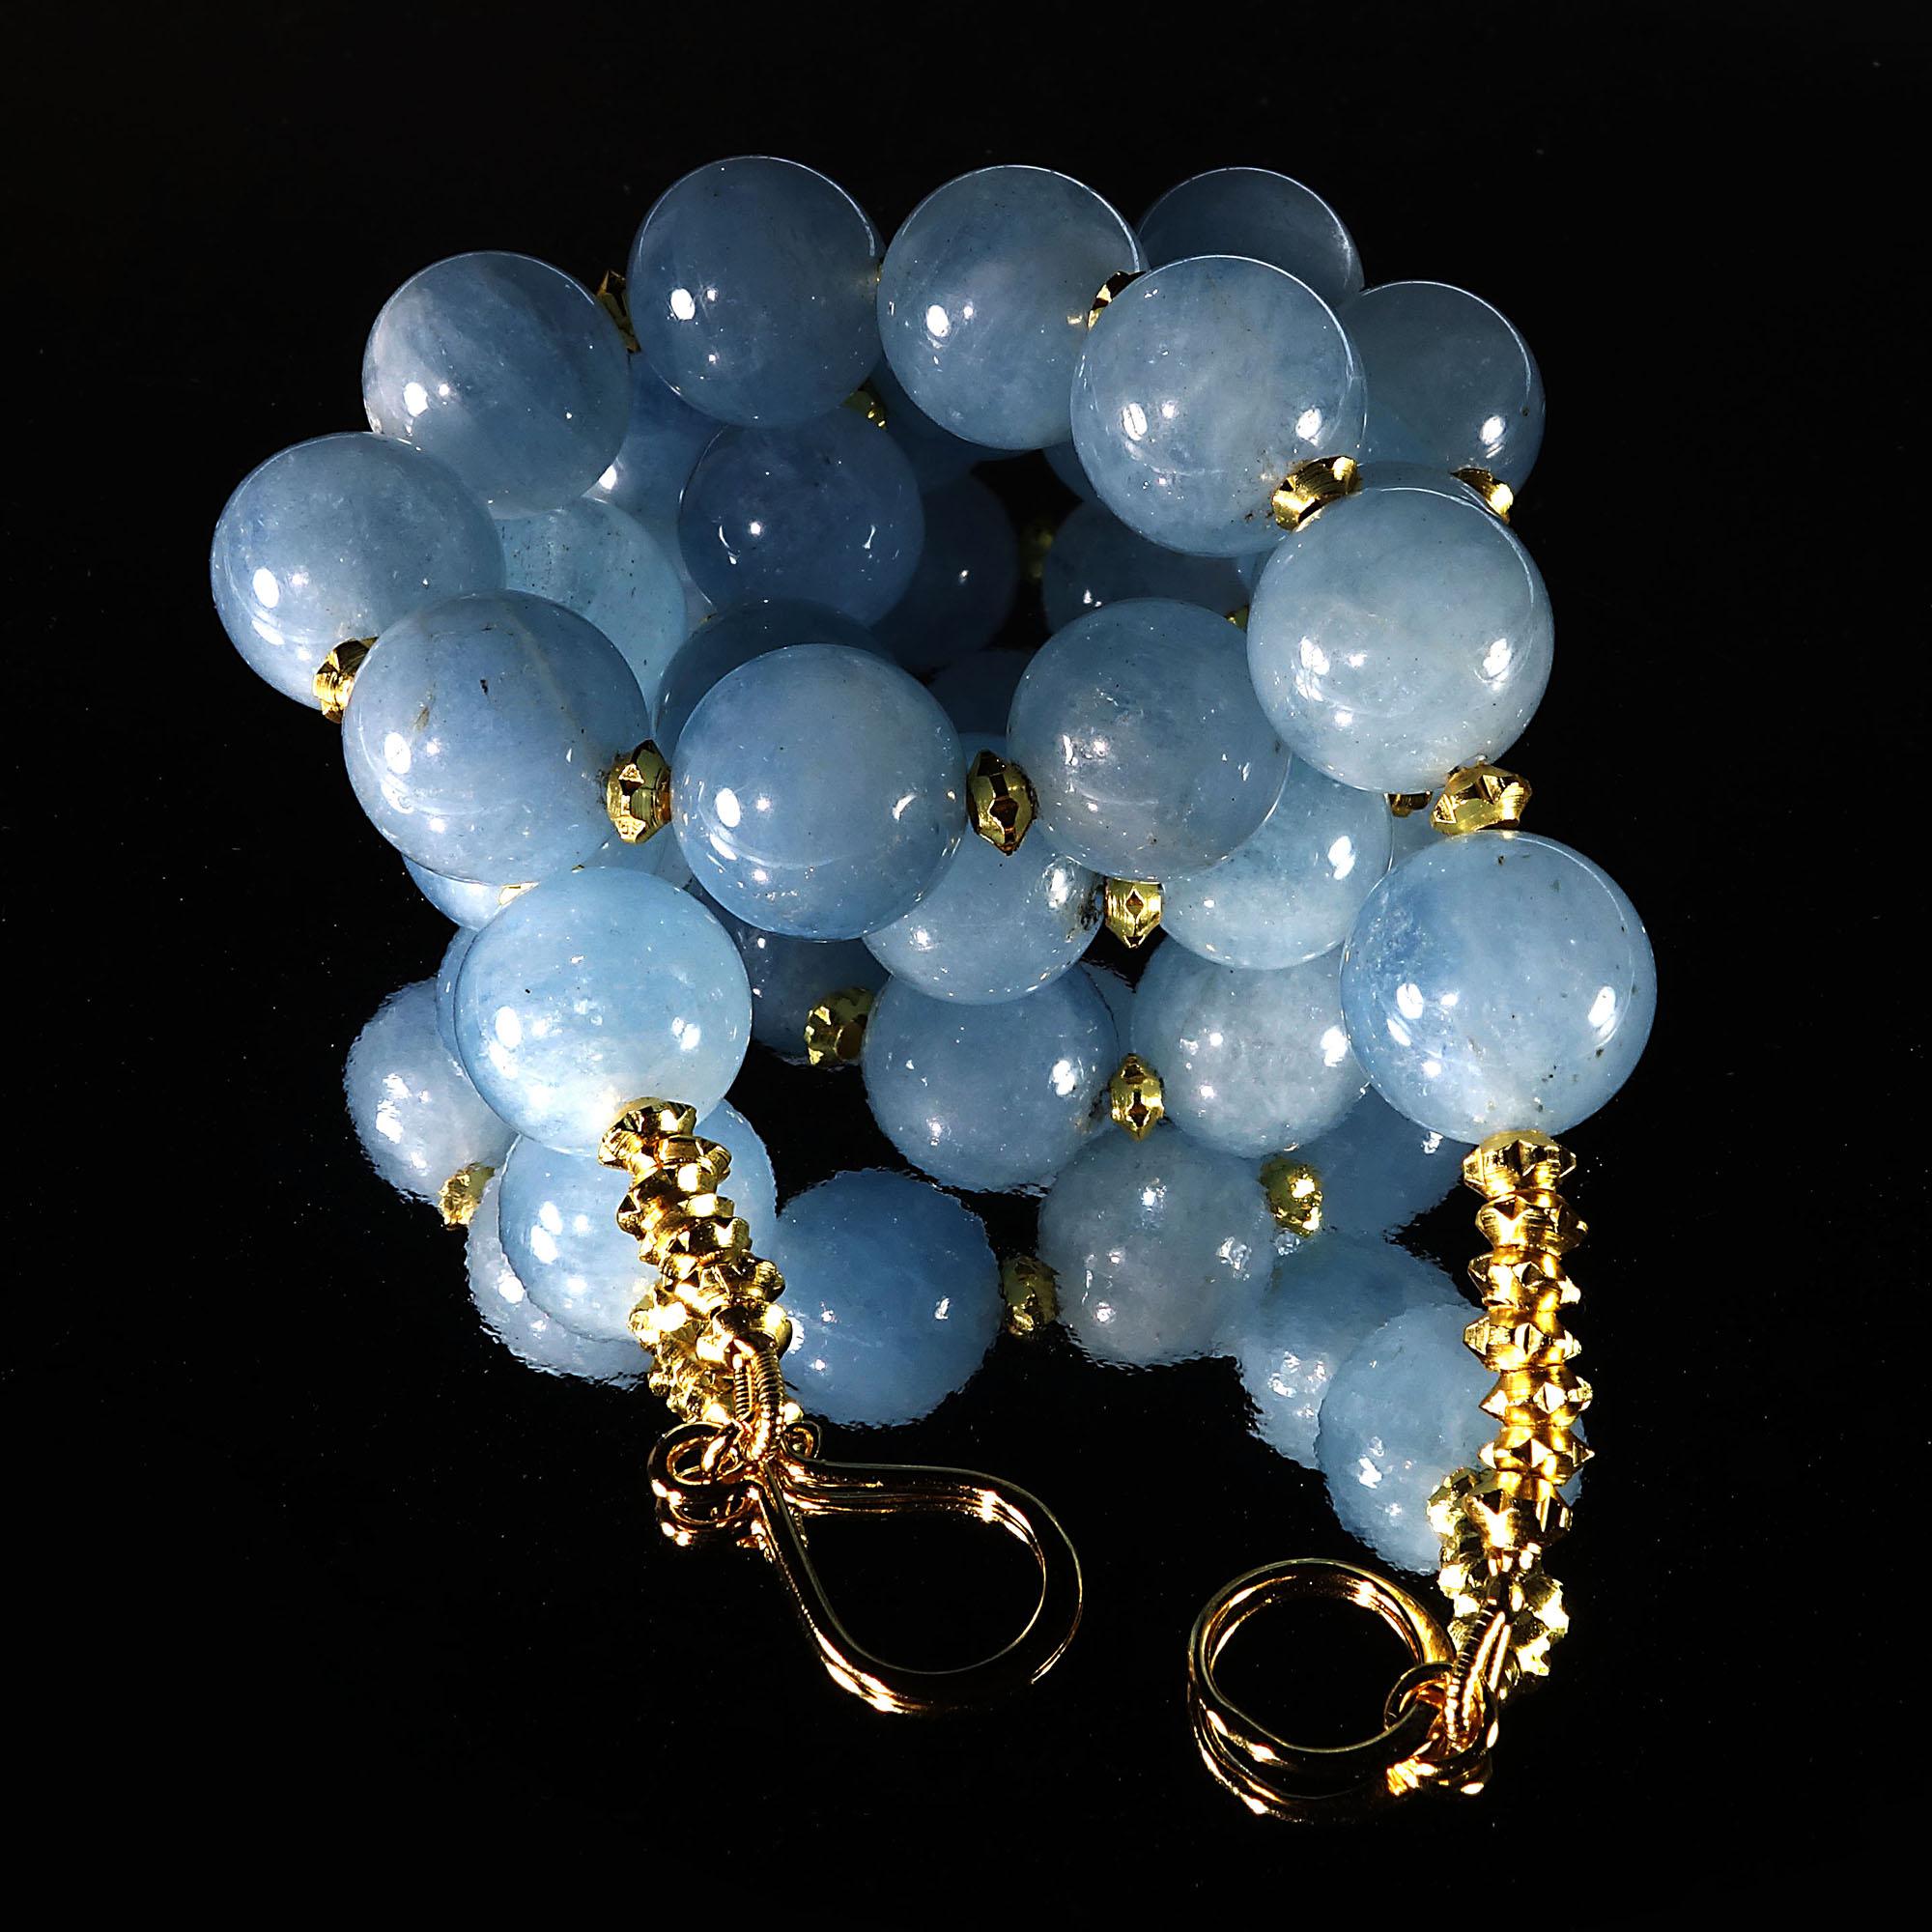 Gemjunky Translucent Aquamarine Choker Necklace with Gold Accents 3